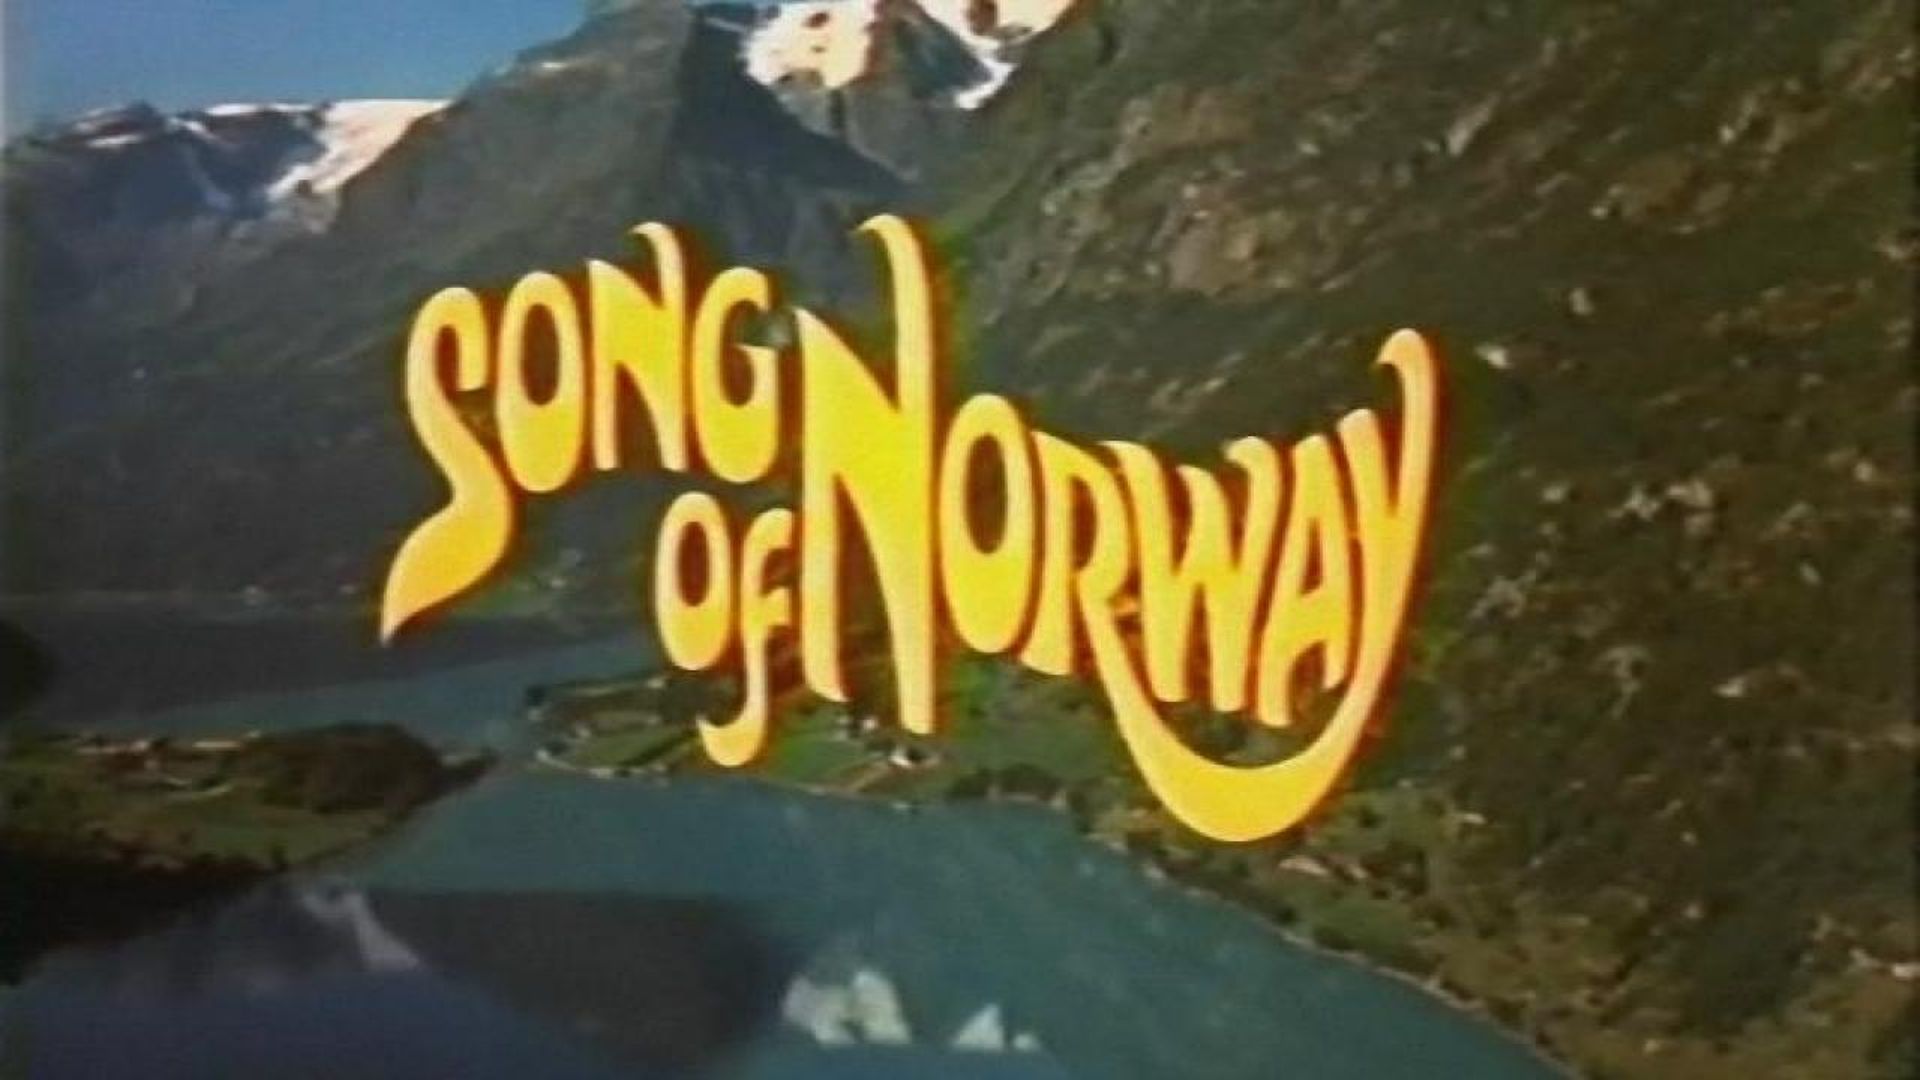 Song of Norway Backdrop